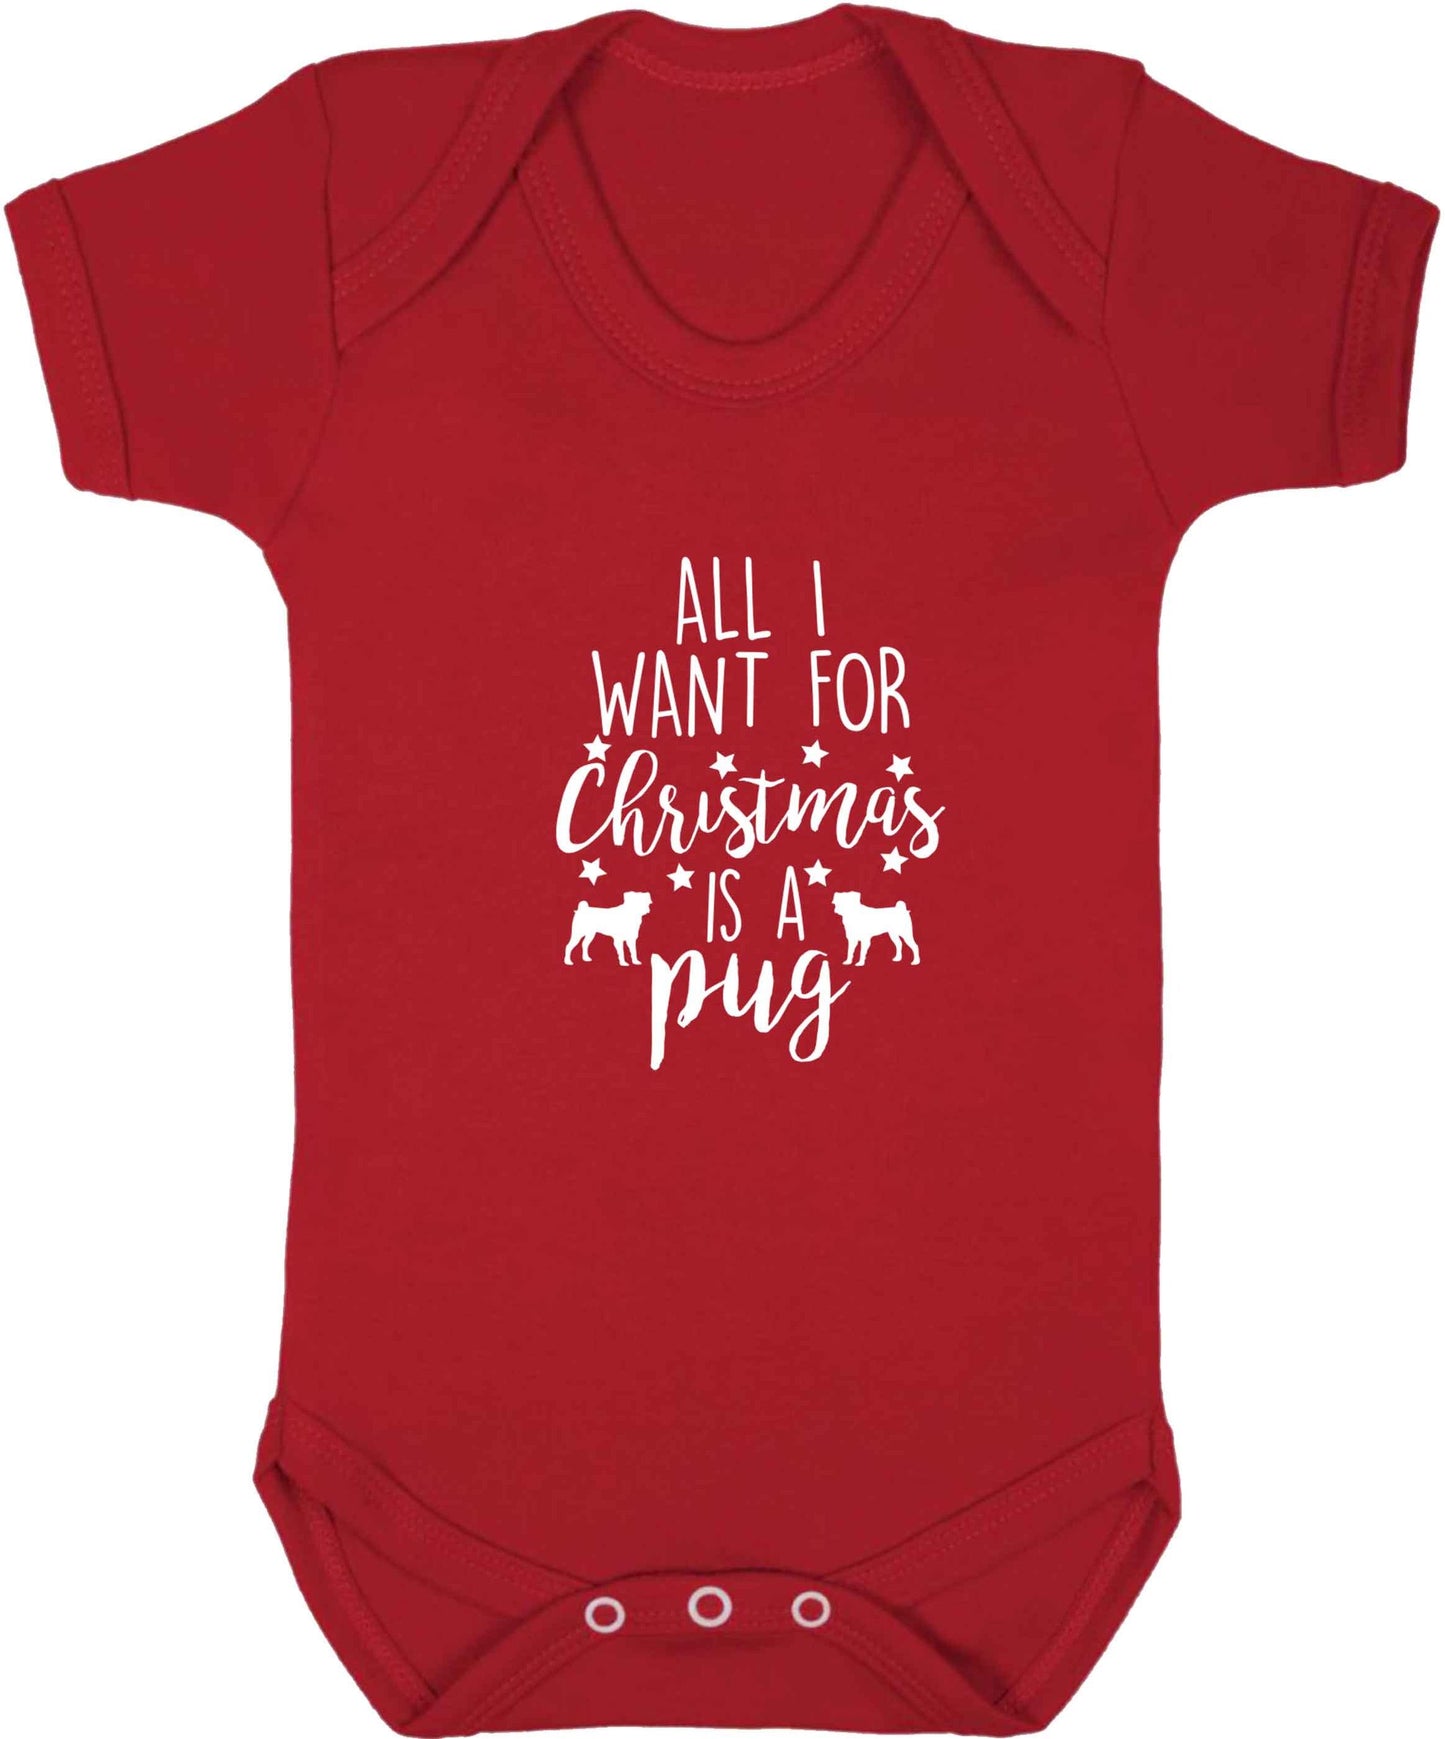 All I want for Christmas is a pug baby vest red 18-24 months